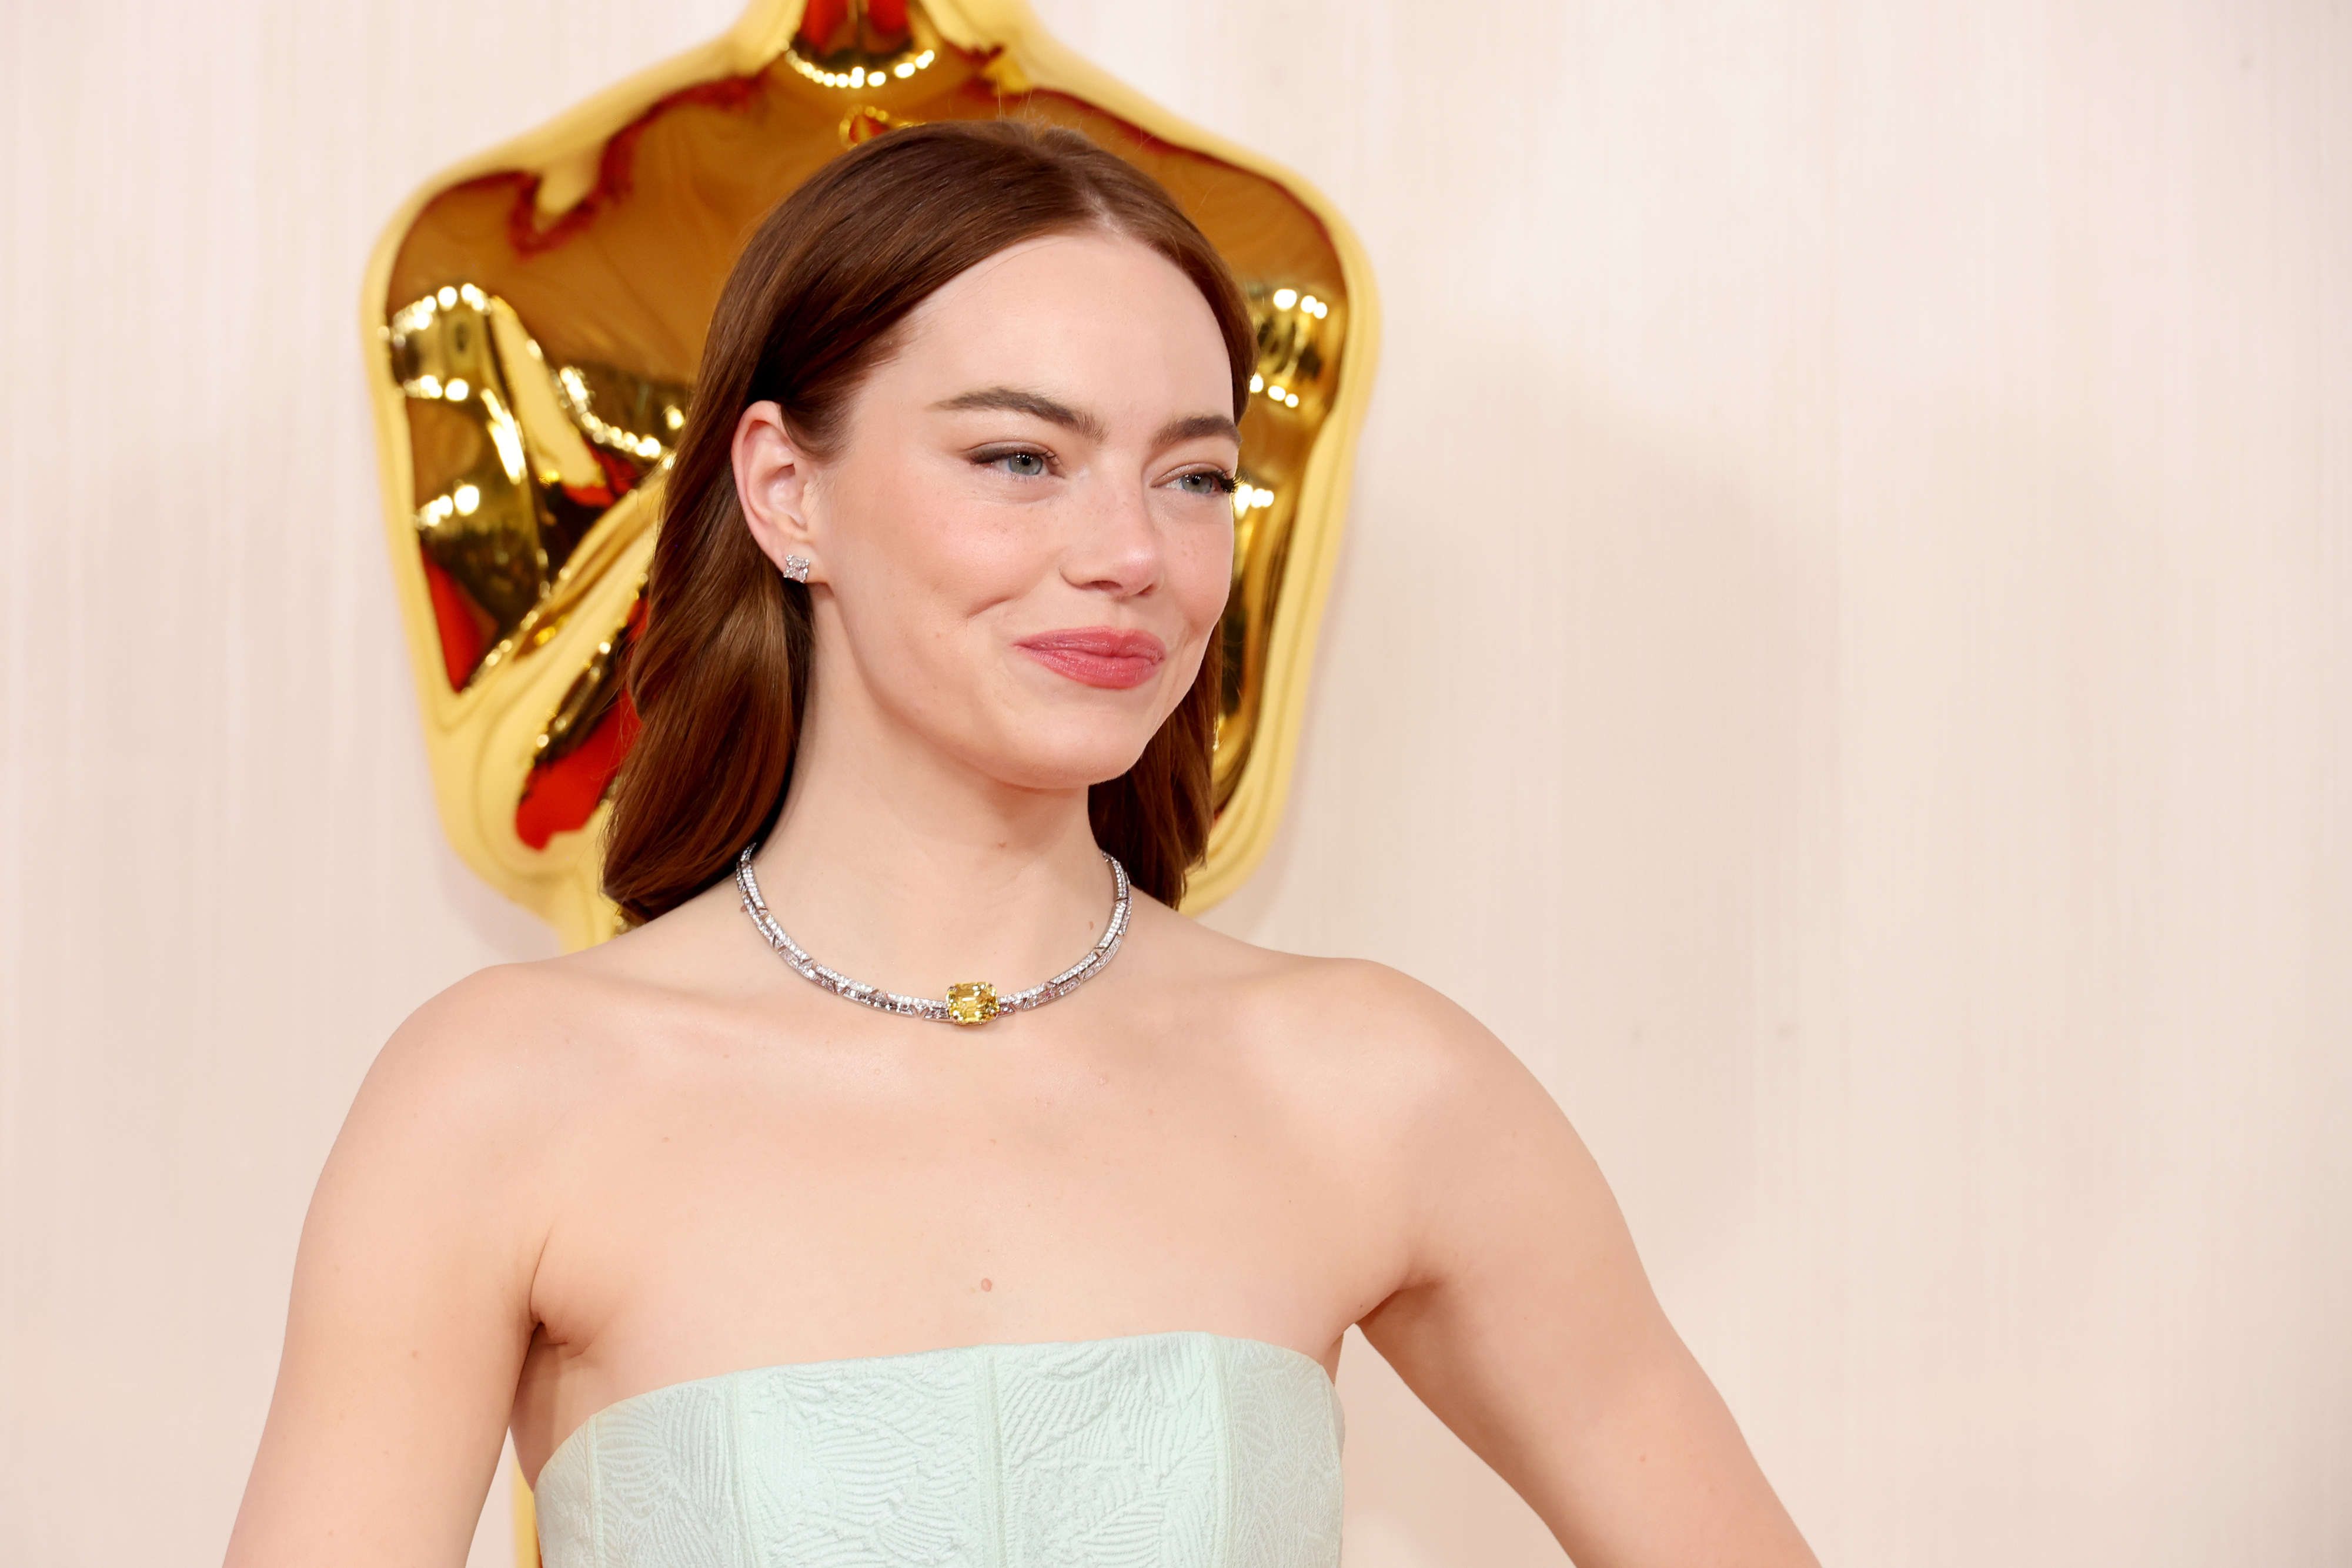 Emma Stone on red carpet wearing strapless gown and statement necklace